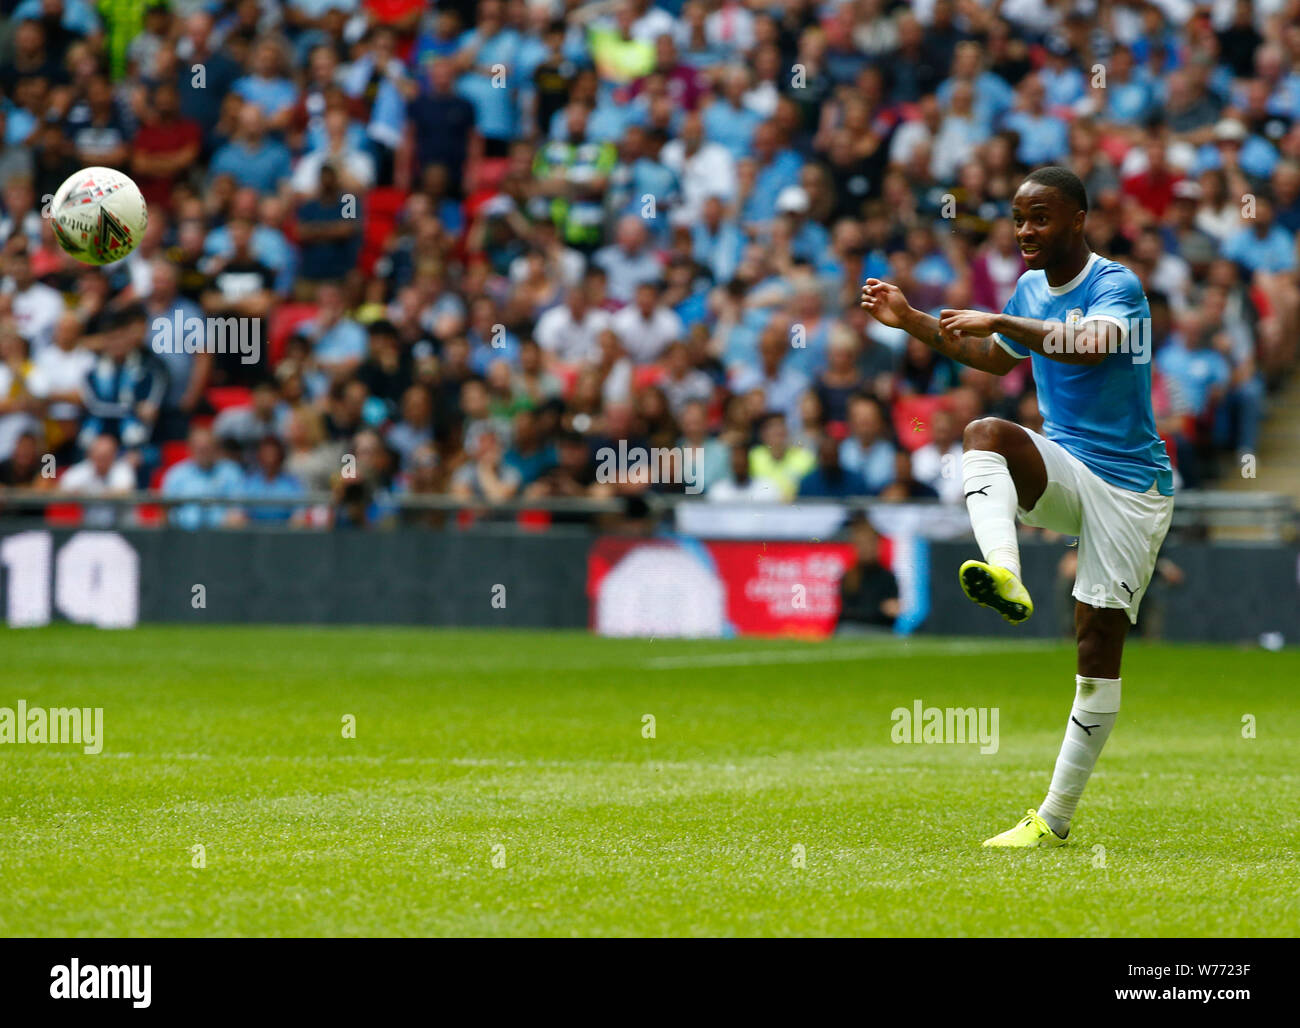 London, UK. 04th Aug, 2019. LONDON, ENGLAND. AUGUST 04: Manchester City's Raheem Sterling during The FA Community Shield between Liverpool and Manchester City at Wembley Stadium on August 04, 2019 in London, England. Credit: Action Foto Sport/Alamy Live News Stock Photo